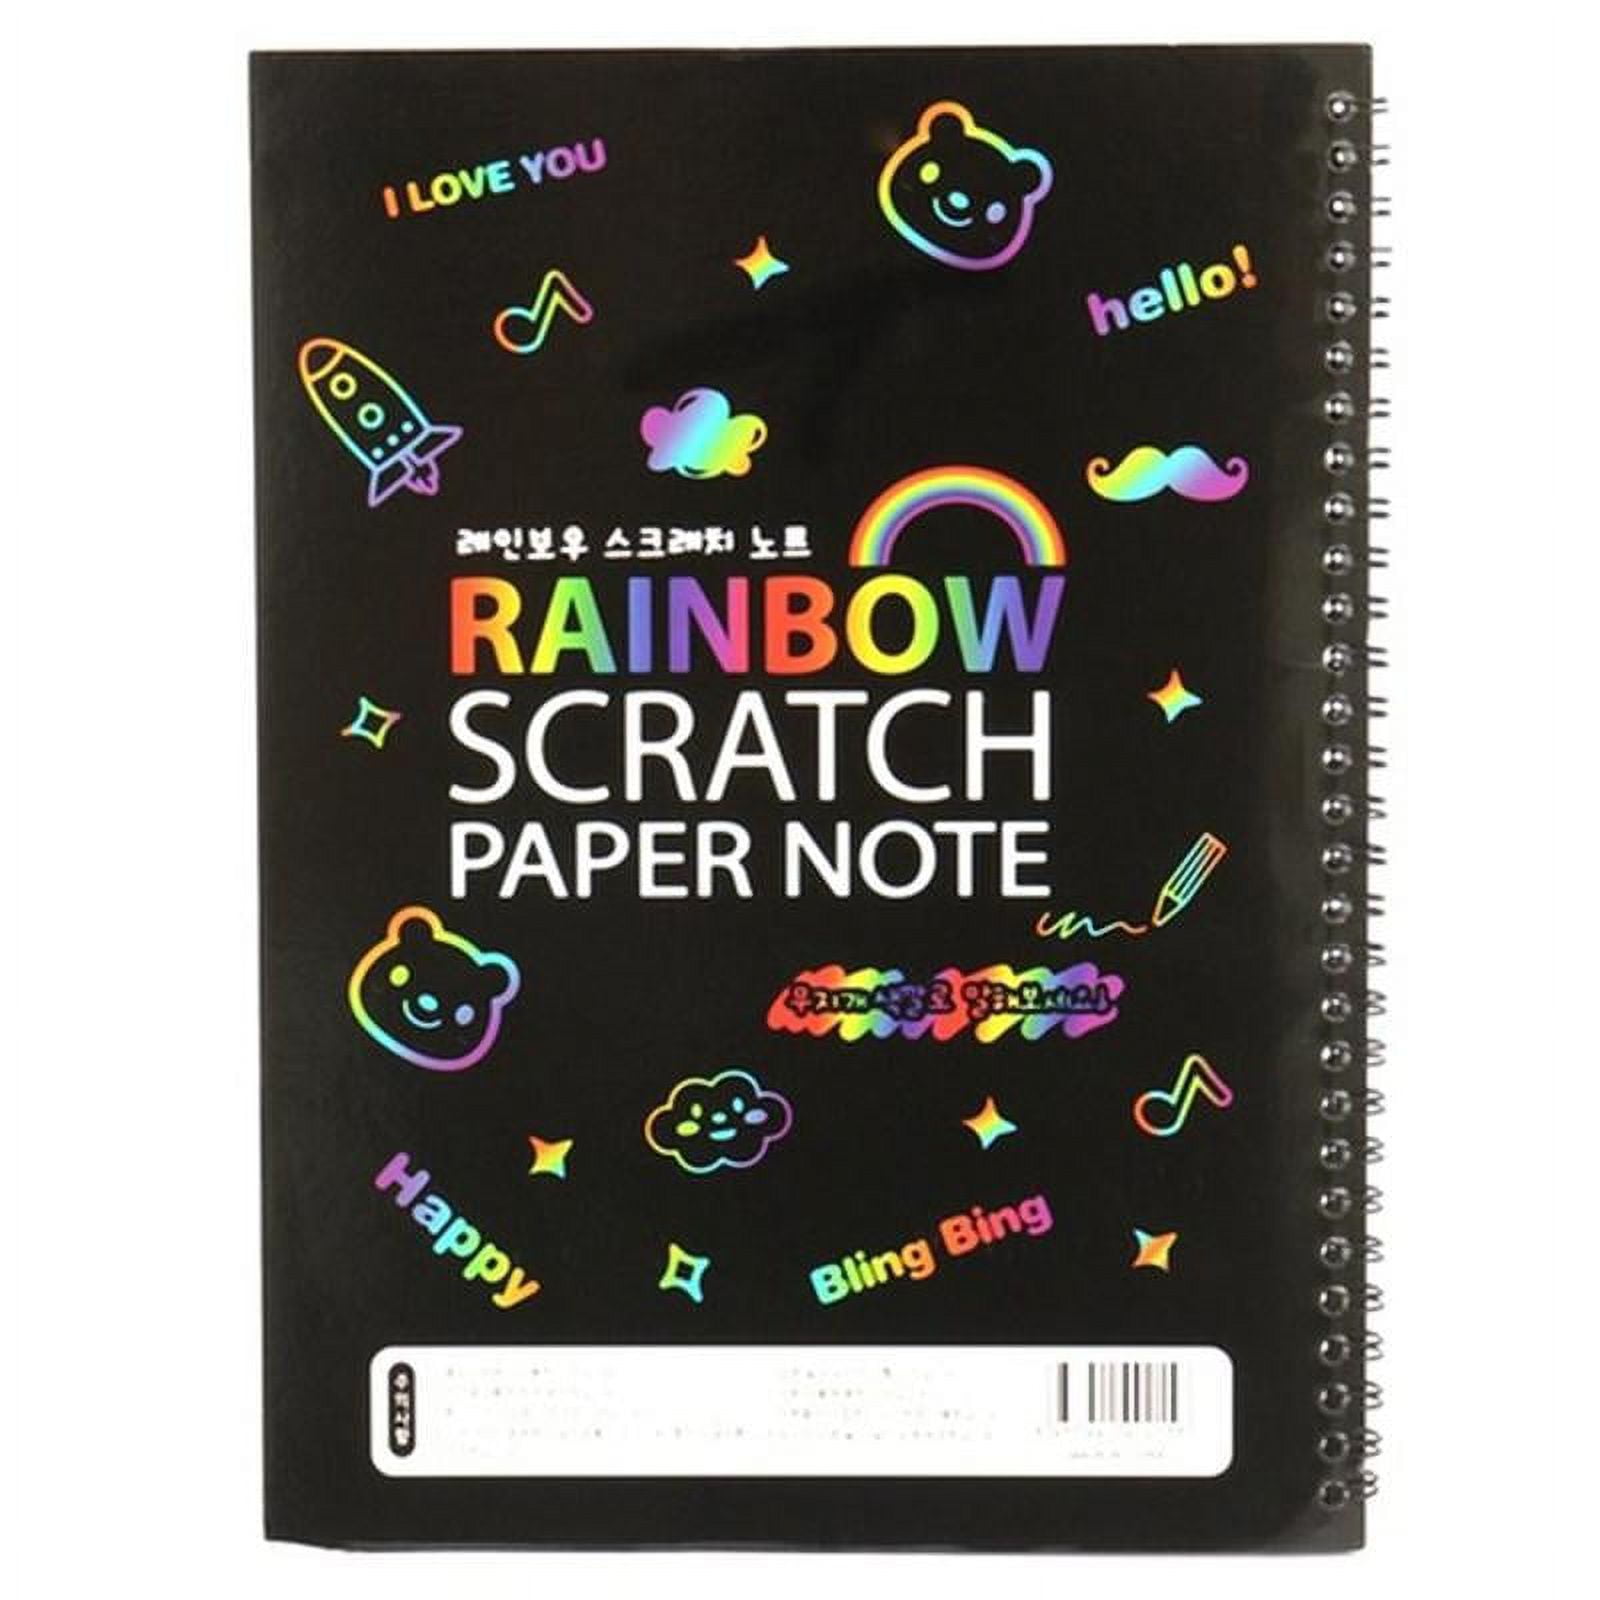 NAIHEY Scratch Art Rainbow Painting Scratch Off Doodle Paper